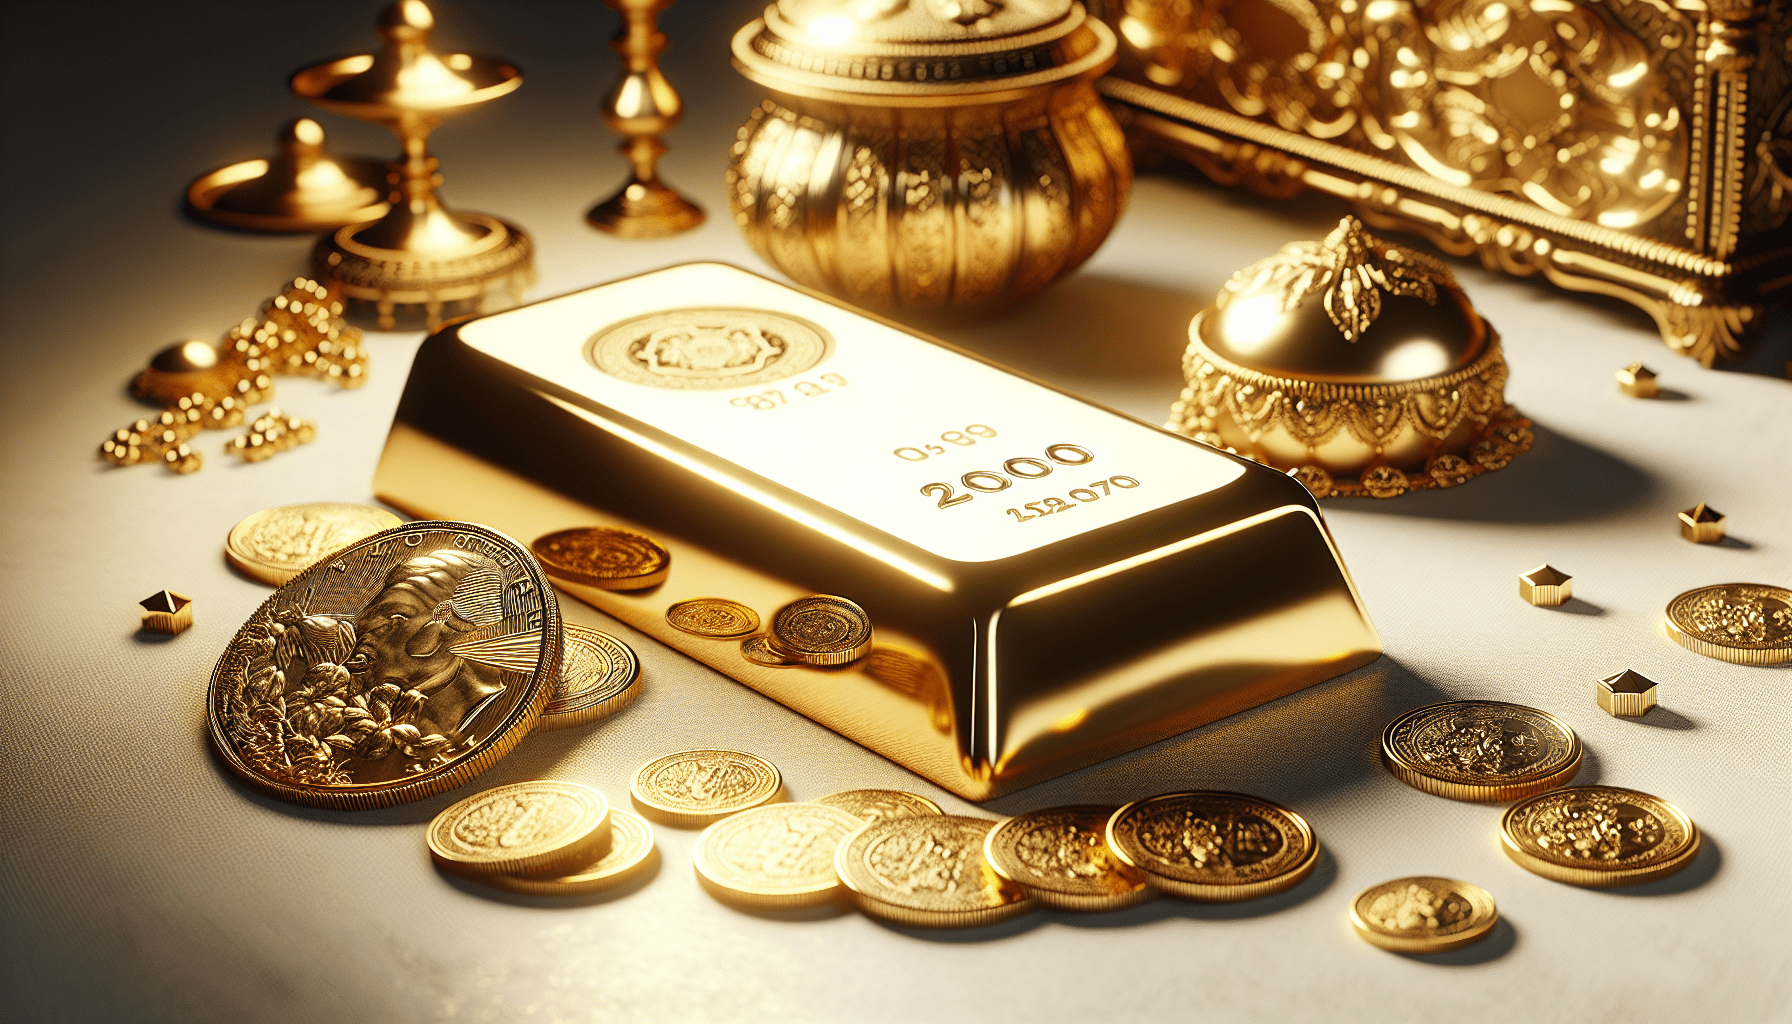 What Is The Price Of Gold For Maybank Gold Investment?